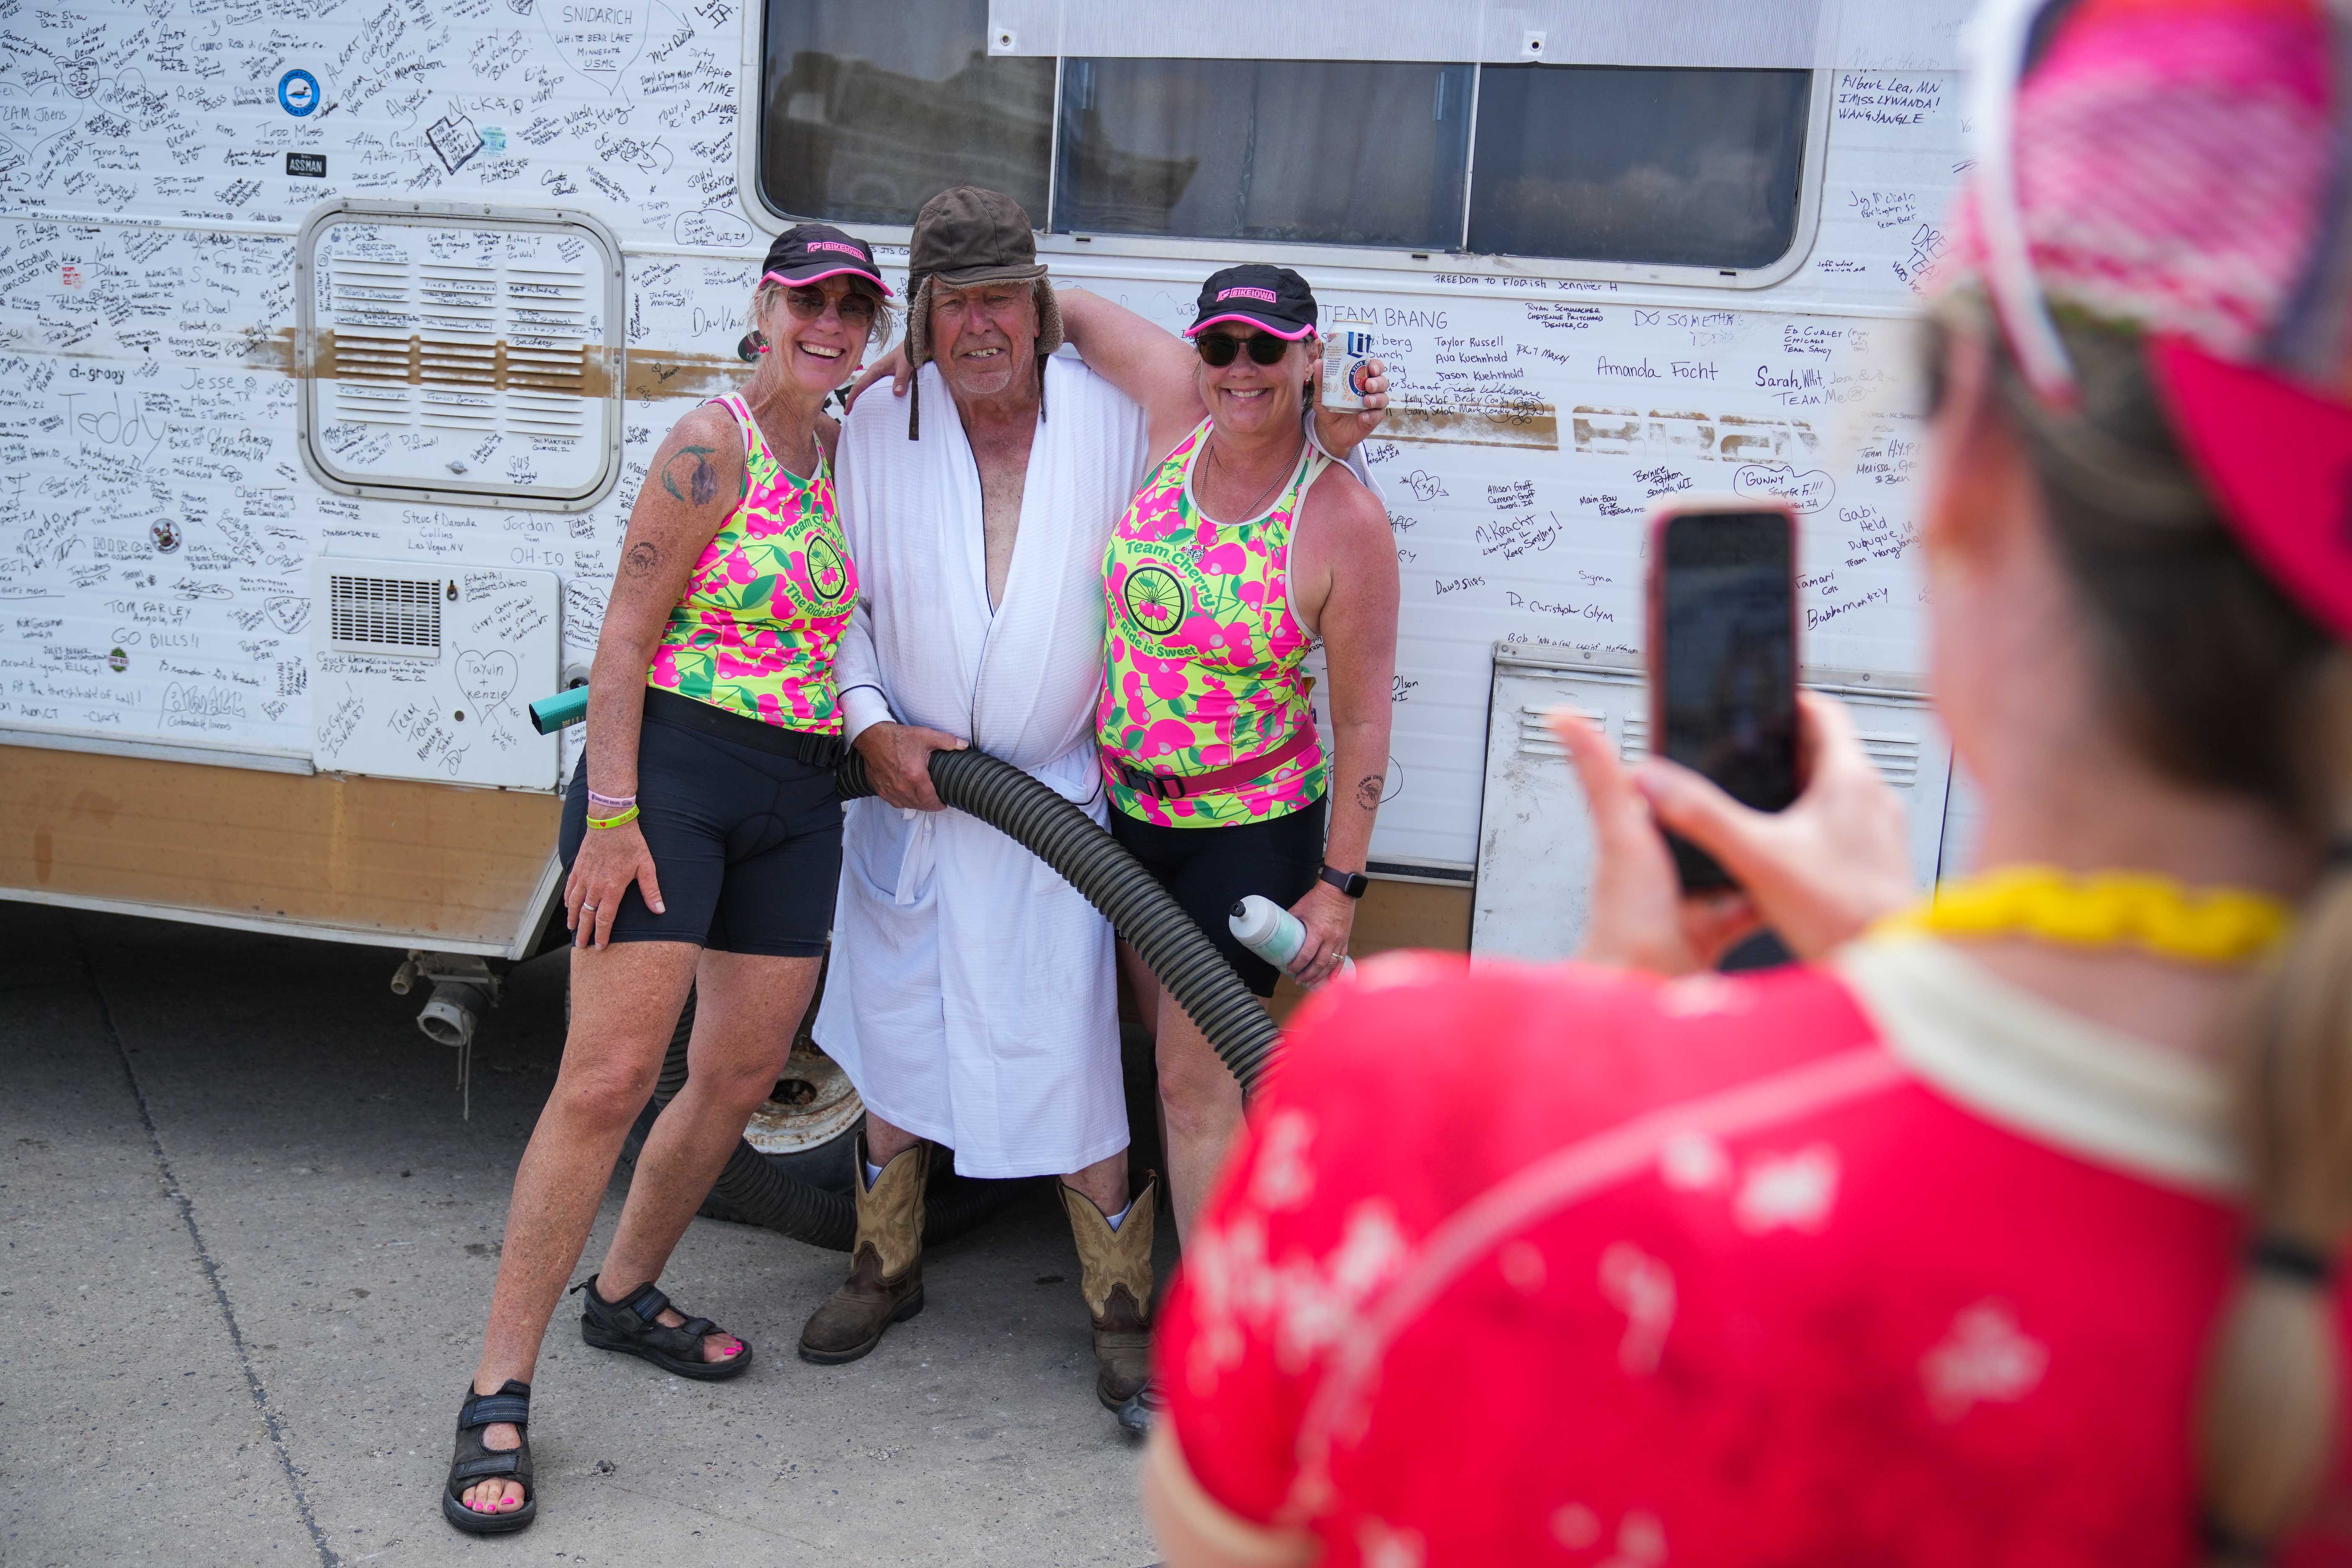 RAGBRAI makes a stop in Griswold, Iowa, bringing riders into 'National Lampoon's Vacation'